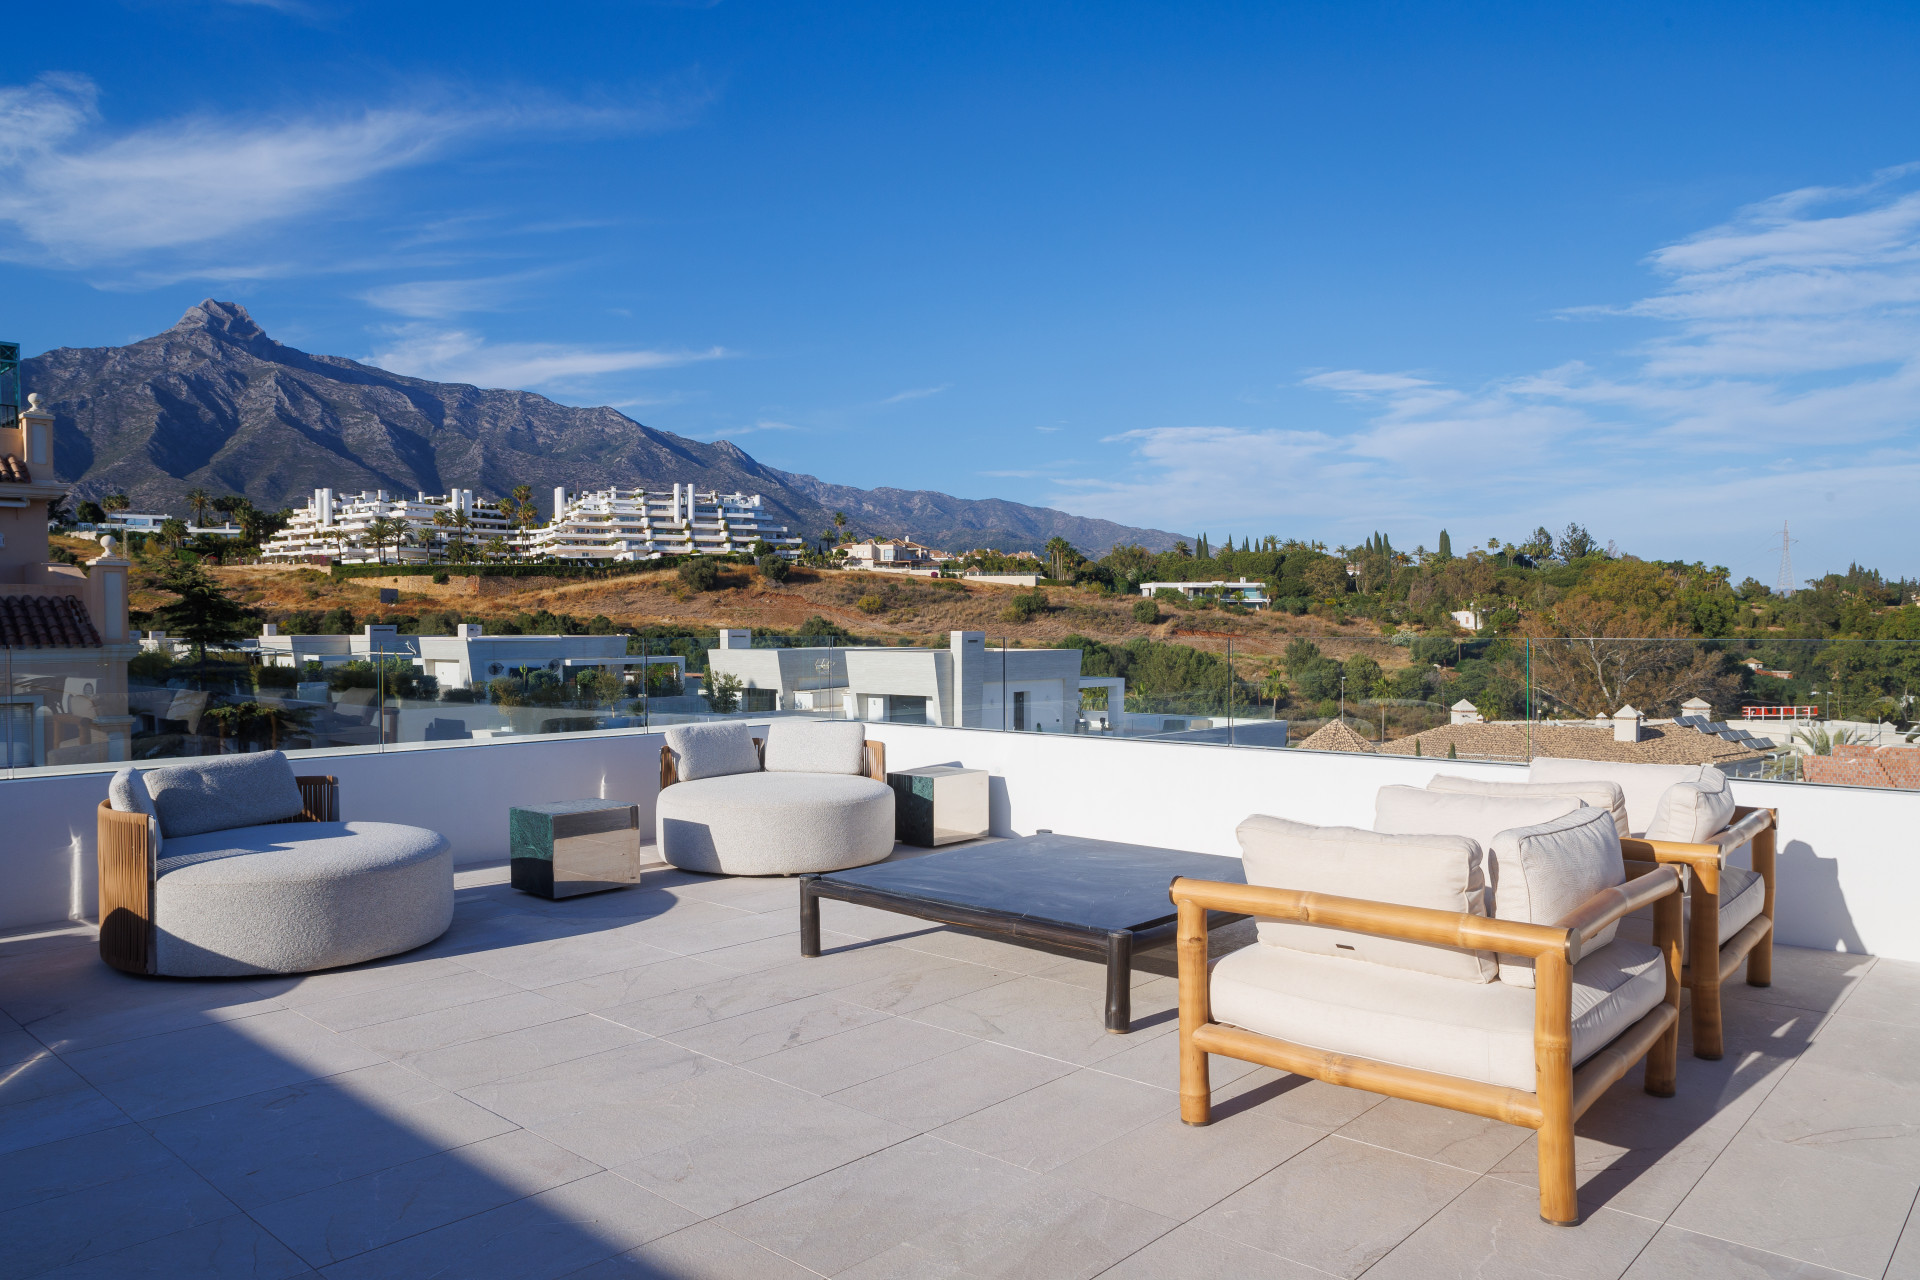 Duplex flat of more than 400 m2 with luxury finishes located in Marbella.